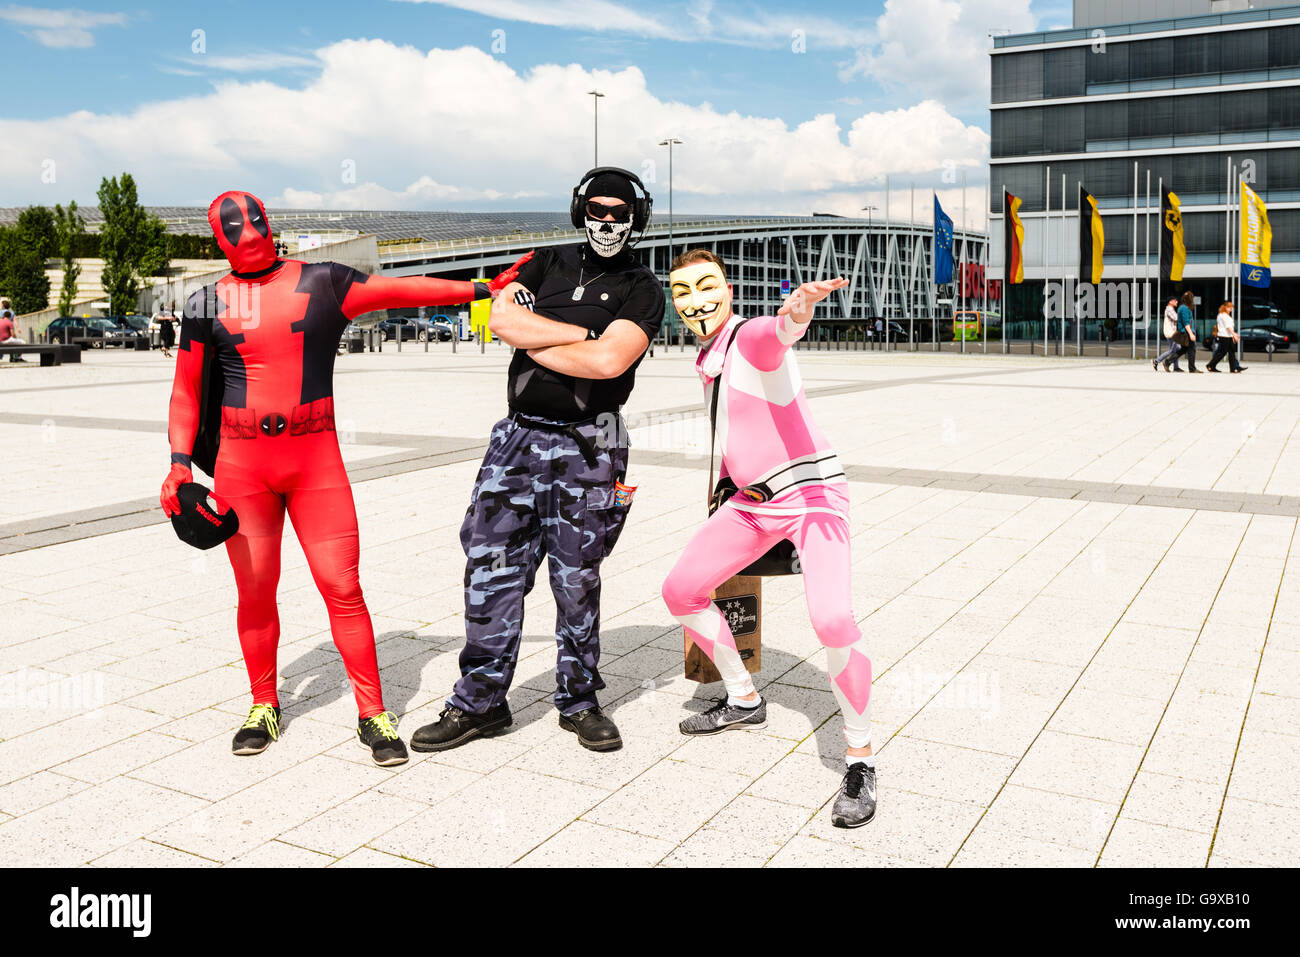 Stuttgart, Germany - June 25, 2016: Three cosplayers are posing during the Comic Con Germany event in Stuttgart in front of the Stock Photo